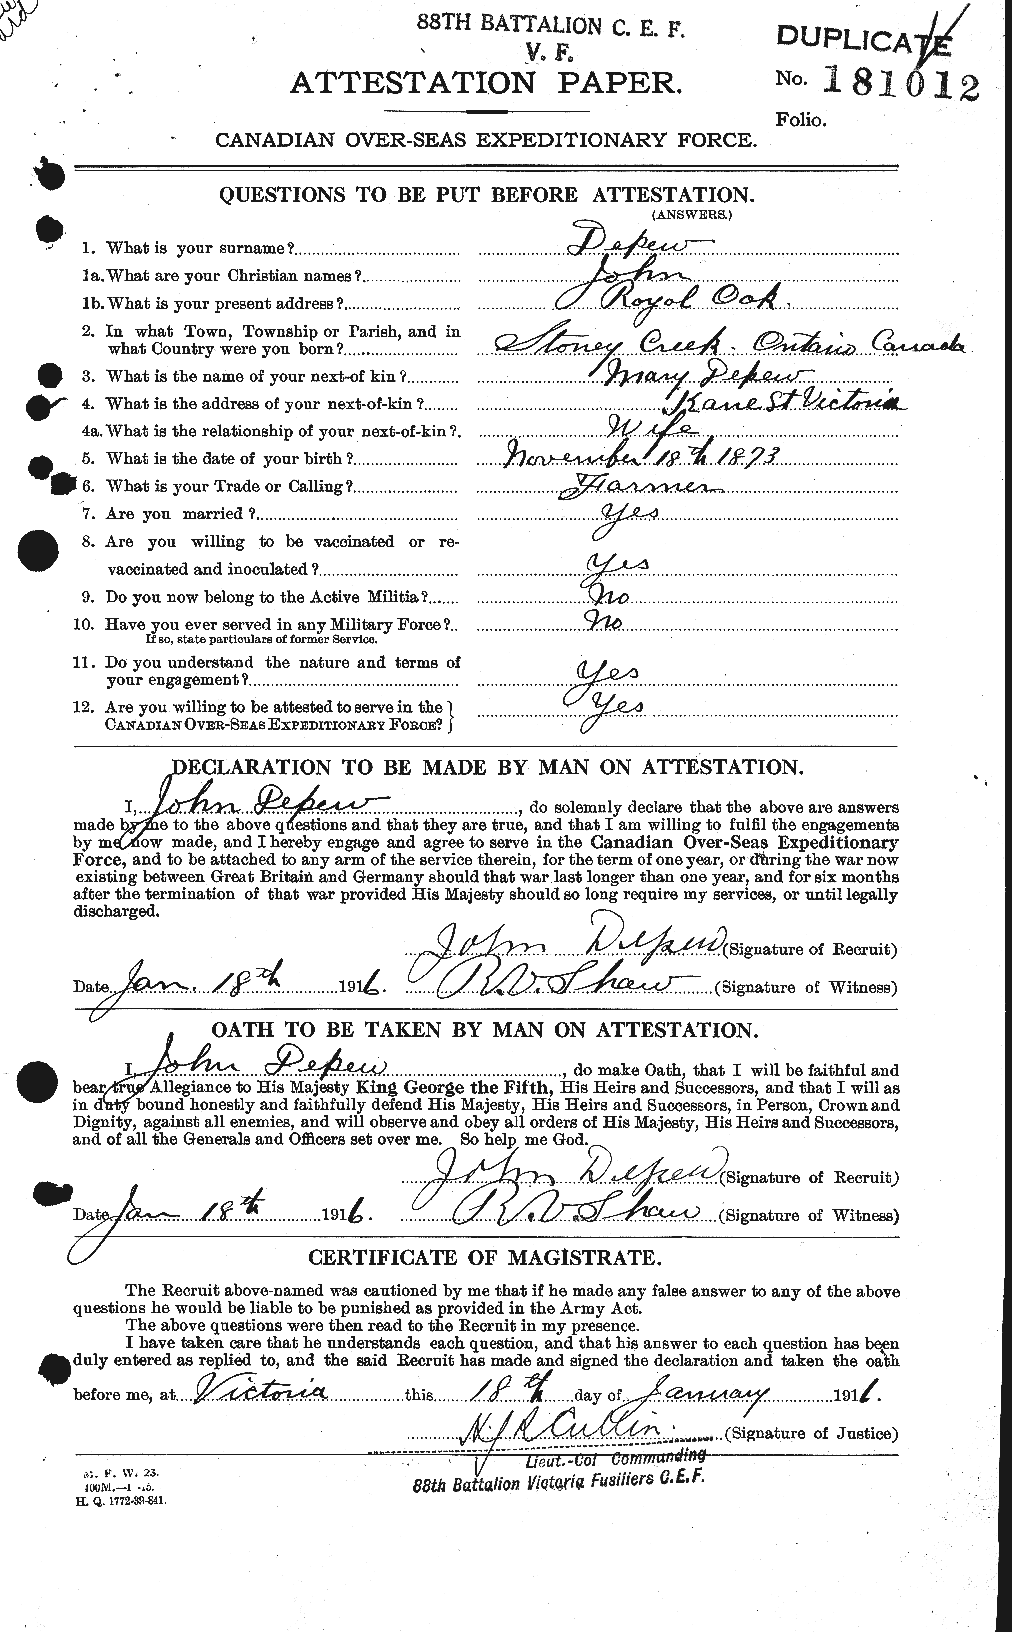 Personnel Records of the First World War - CEF 288994a